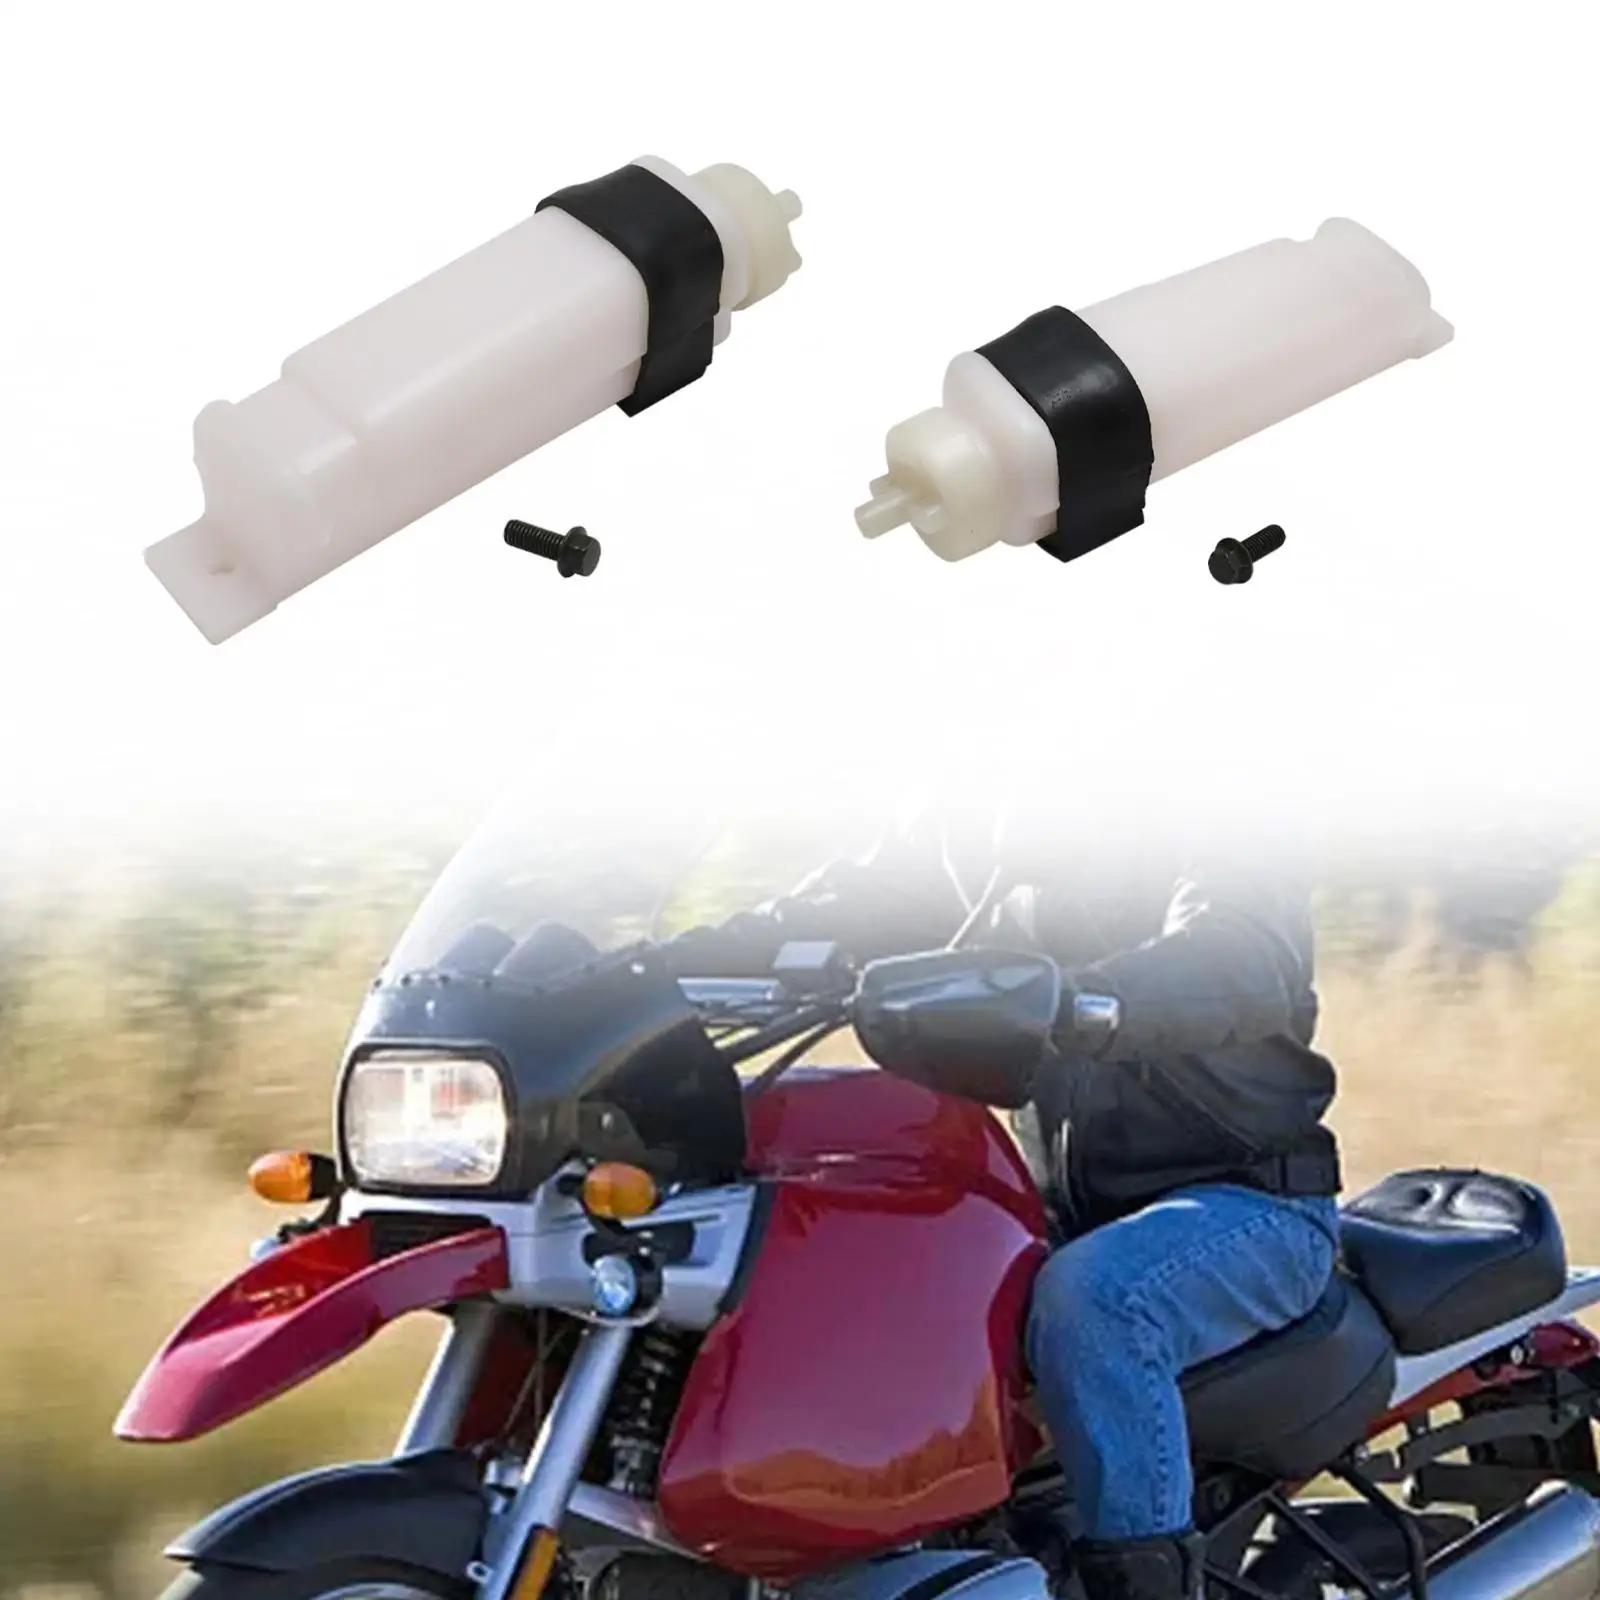 Cooling Water Tank ABS Coolant Reservoir for Motorcycle